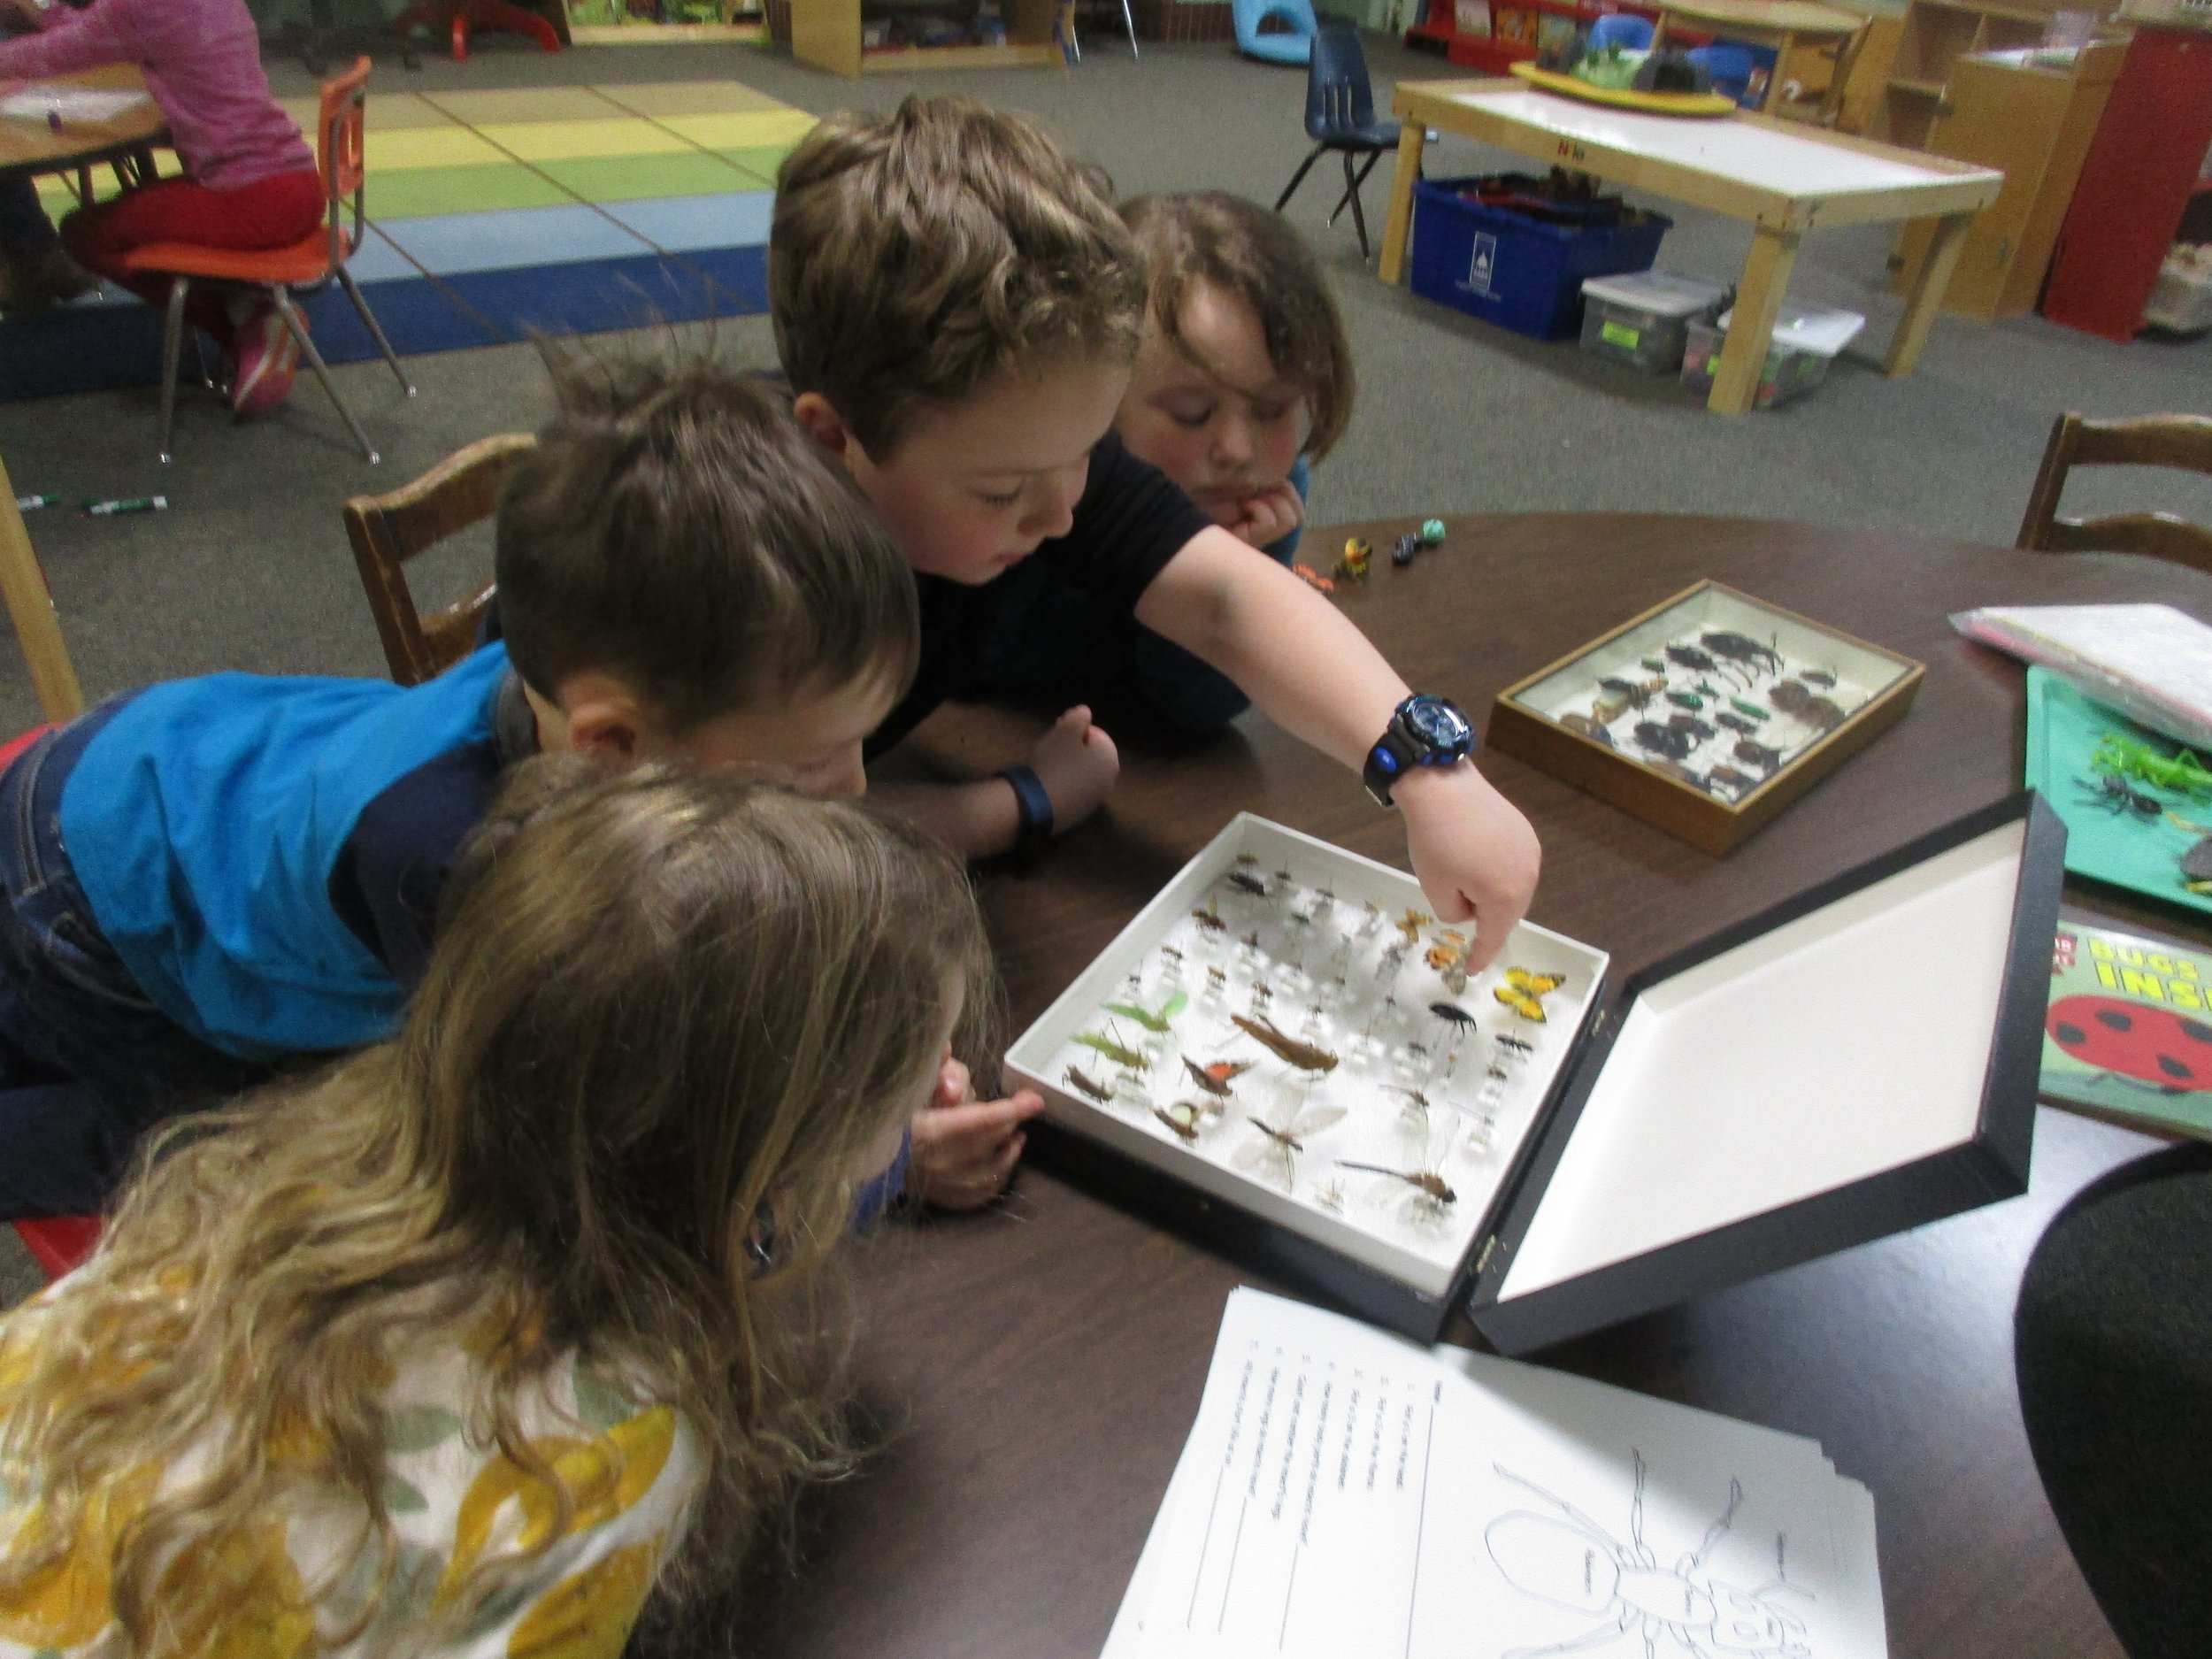 Examining insects